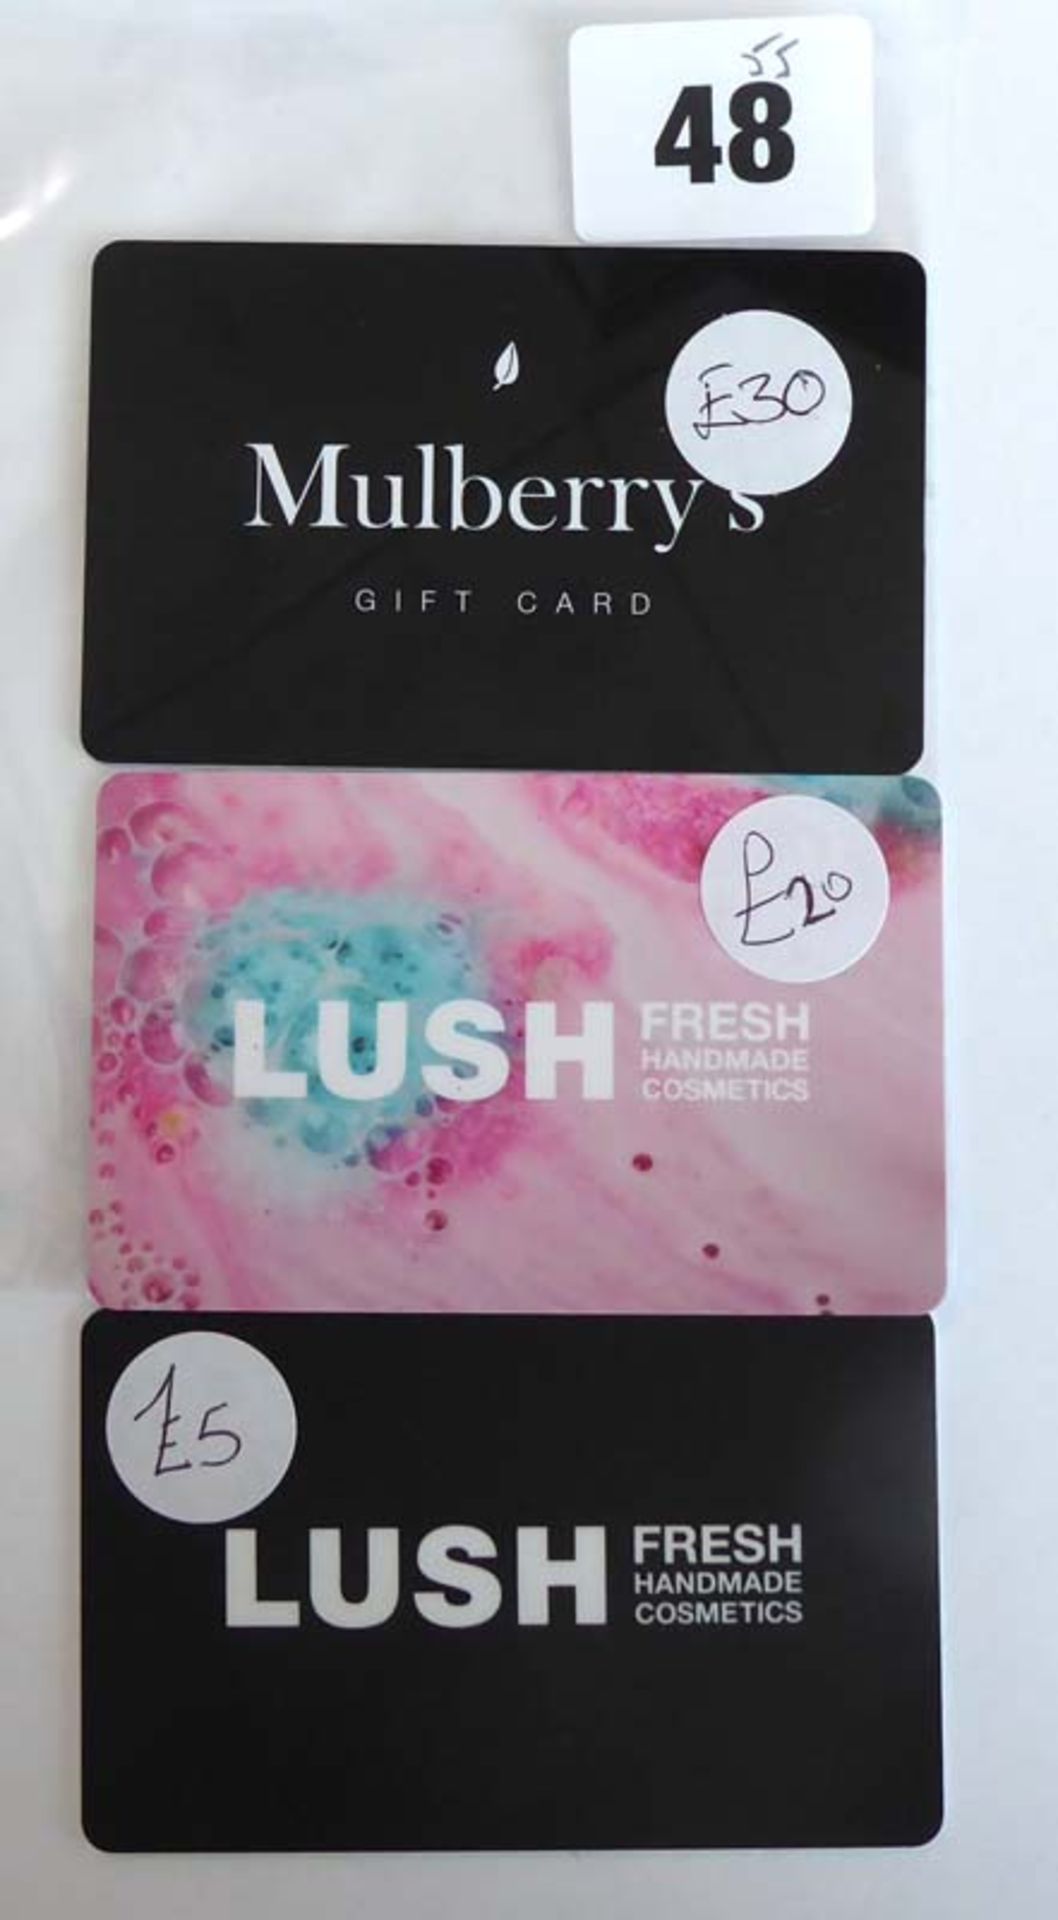 Lush (x3) - Total face value £55